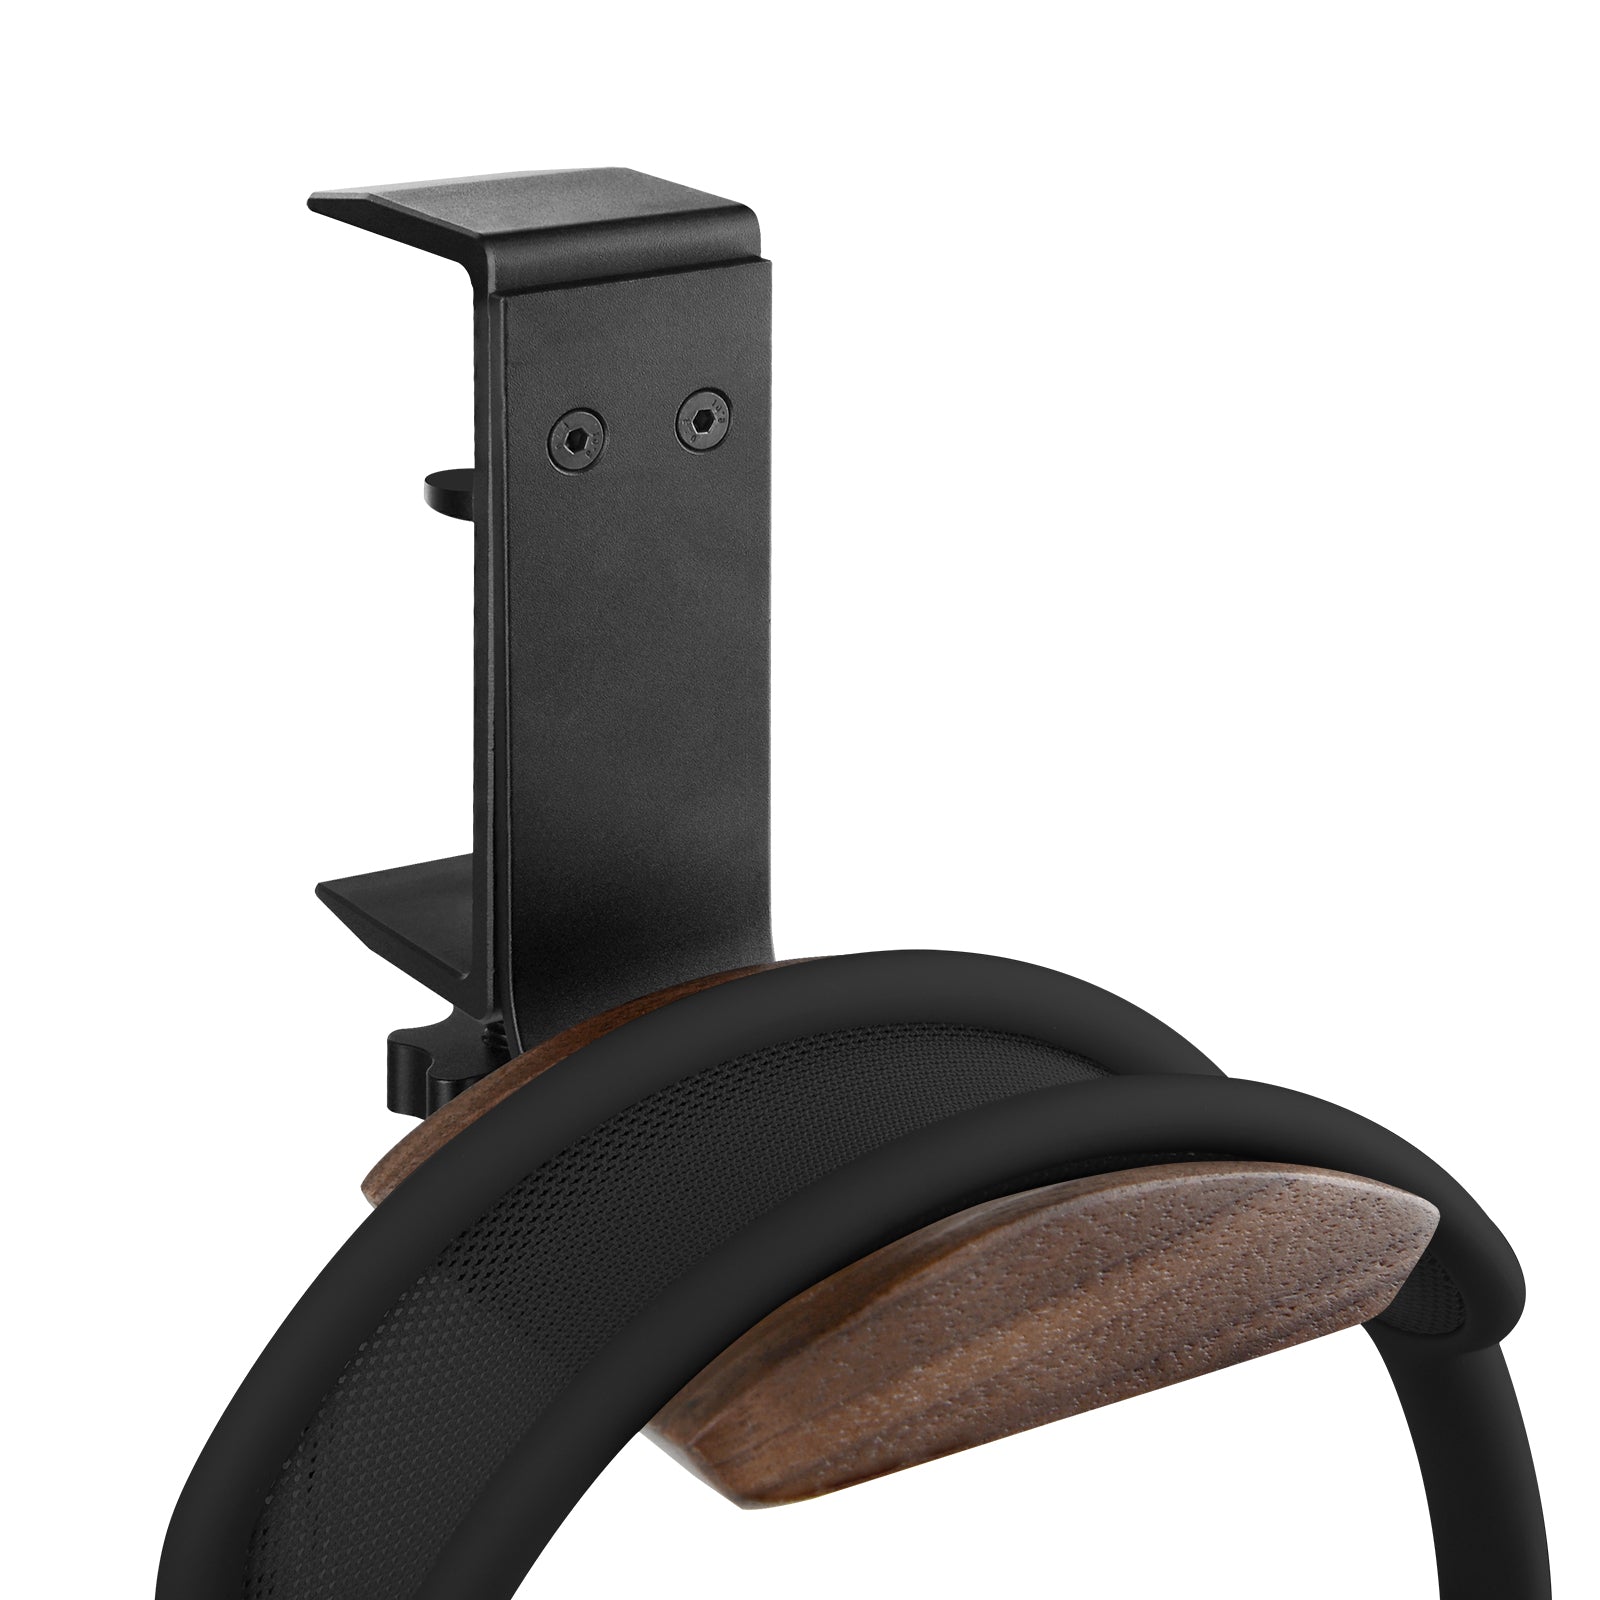 Geekria Wooden Headphones Stand Compatible with Air Pods Max, Sony WH